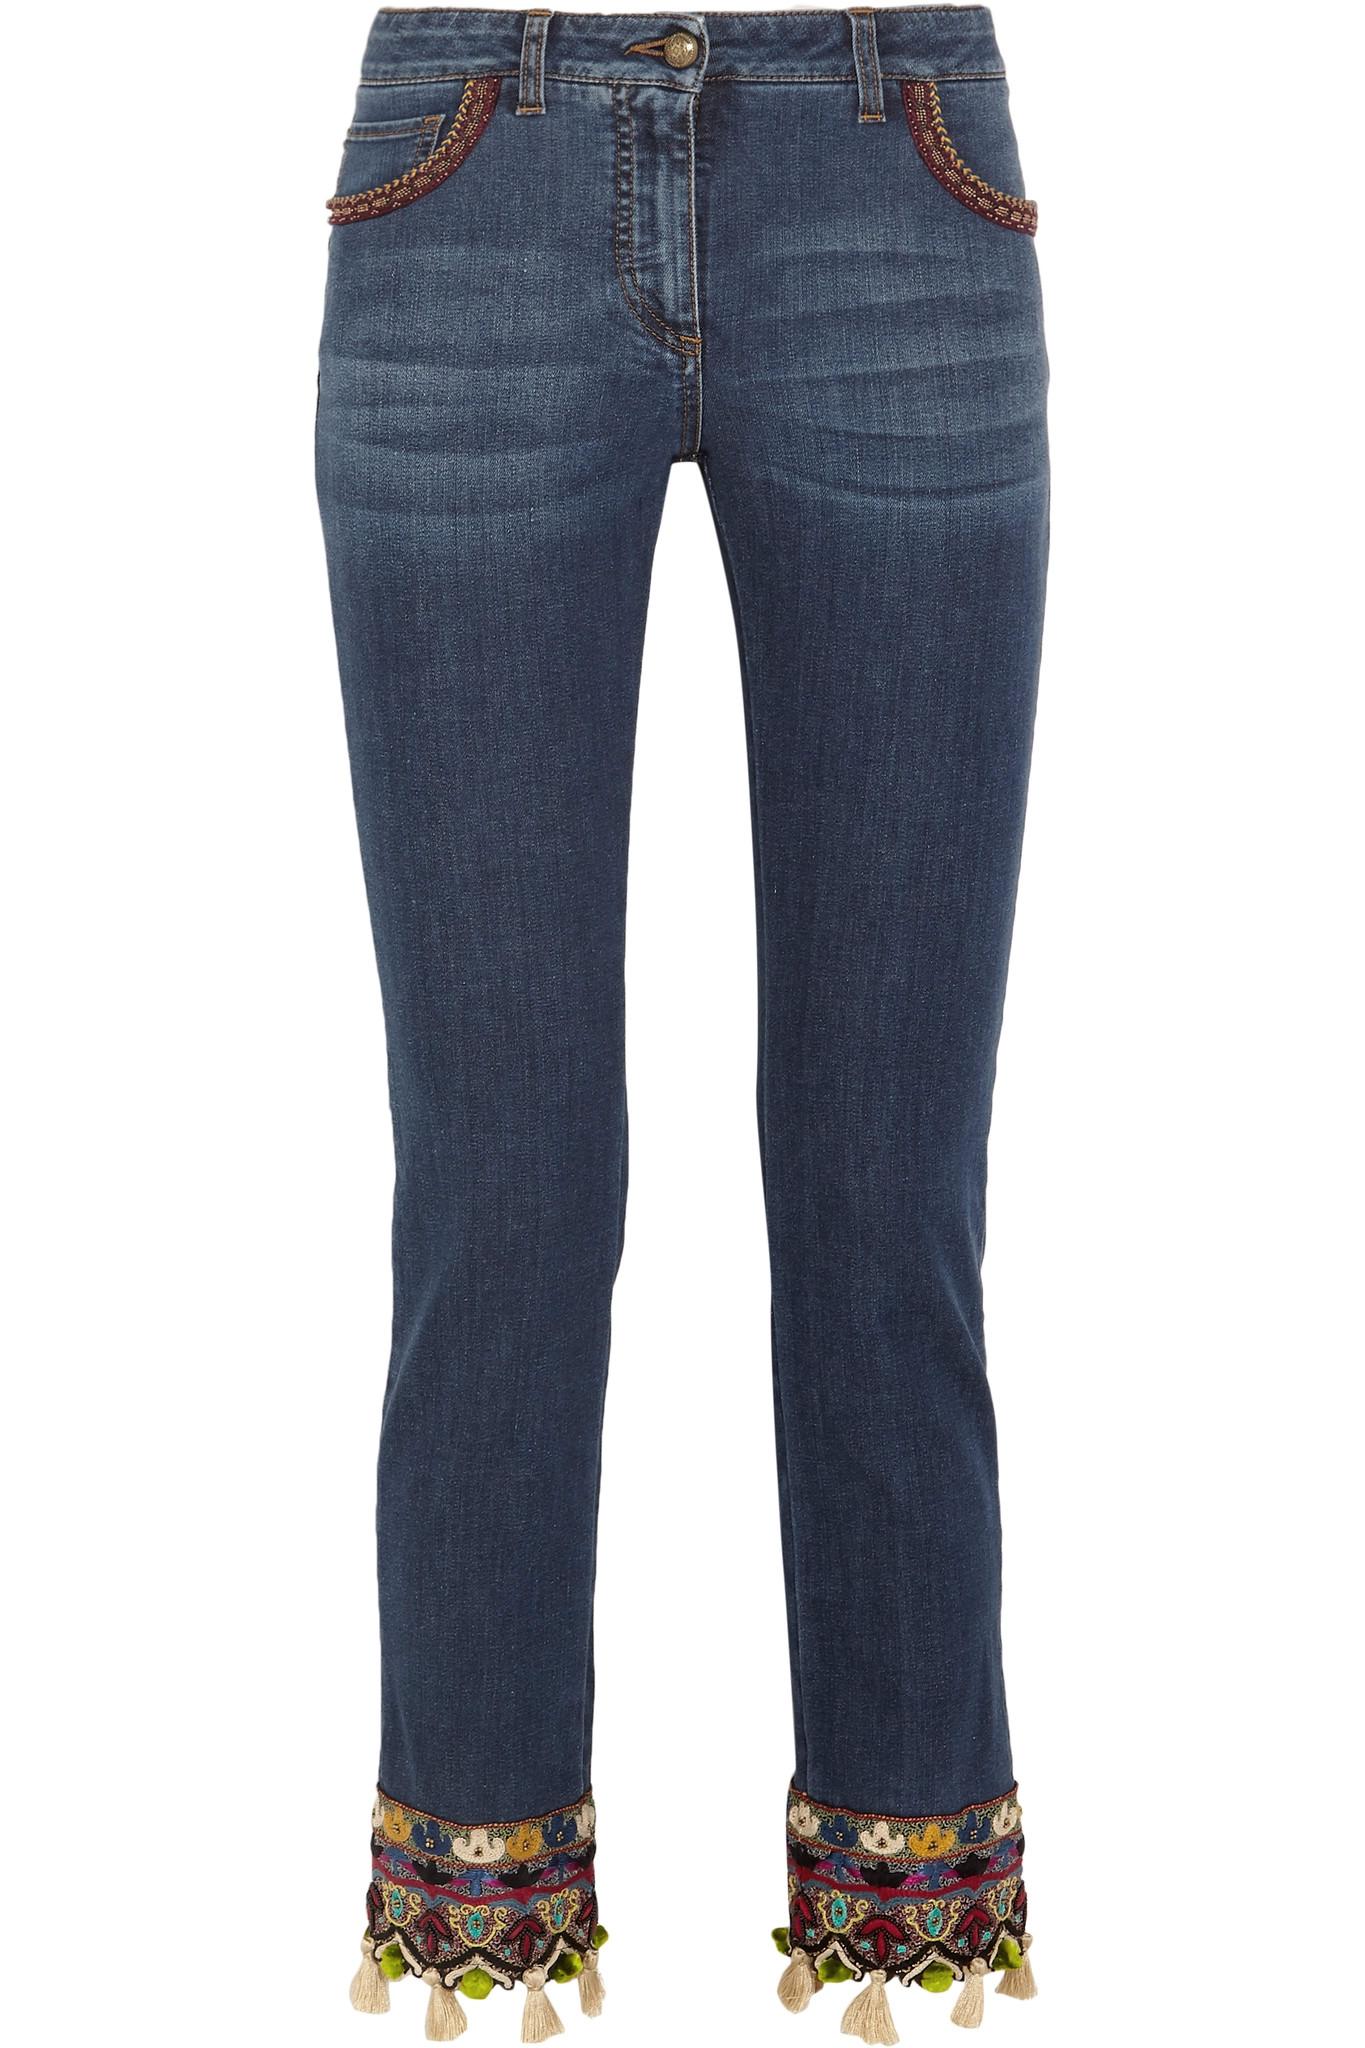 Etro Denim Embellished Embroidered Mid-rise Slim-leg Jeans in Blue - Lyst